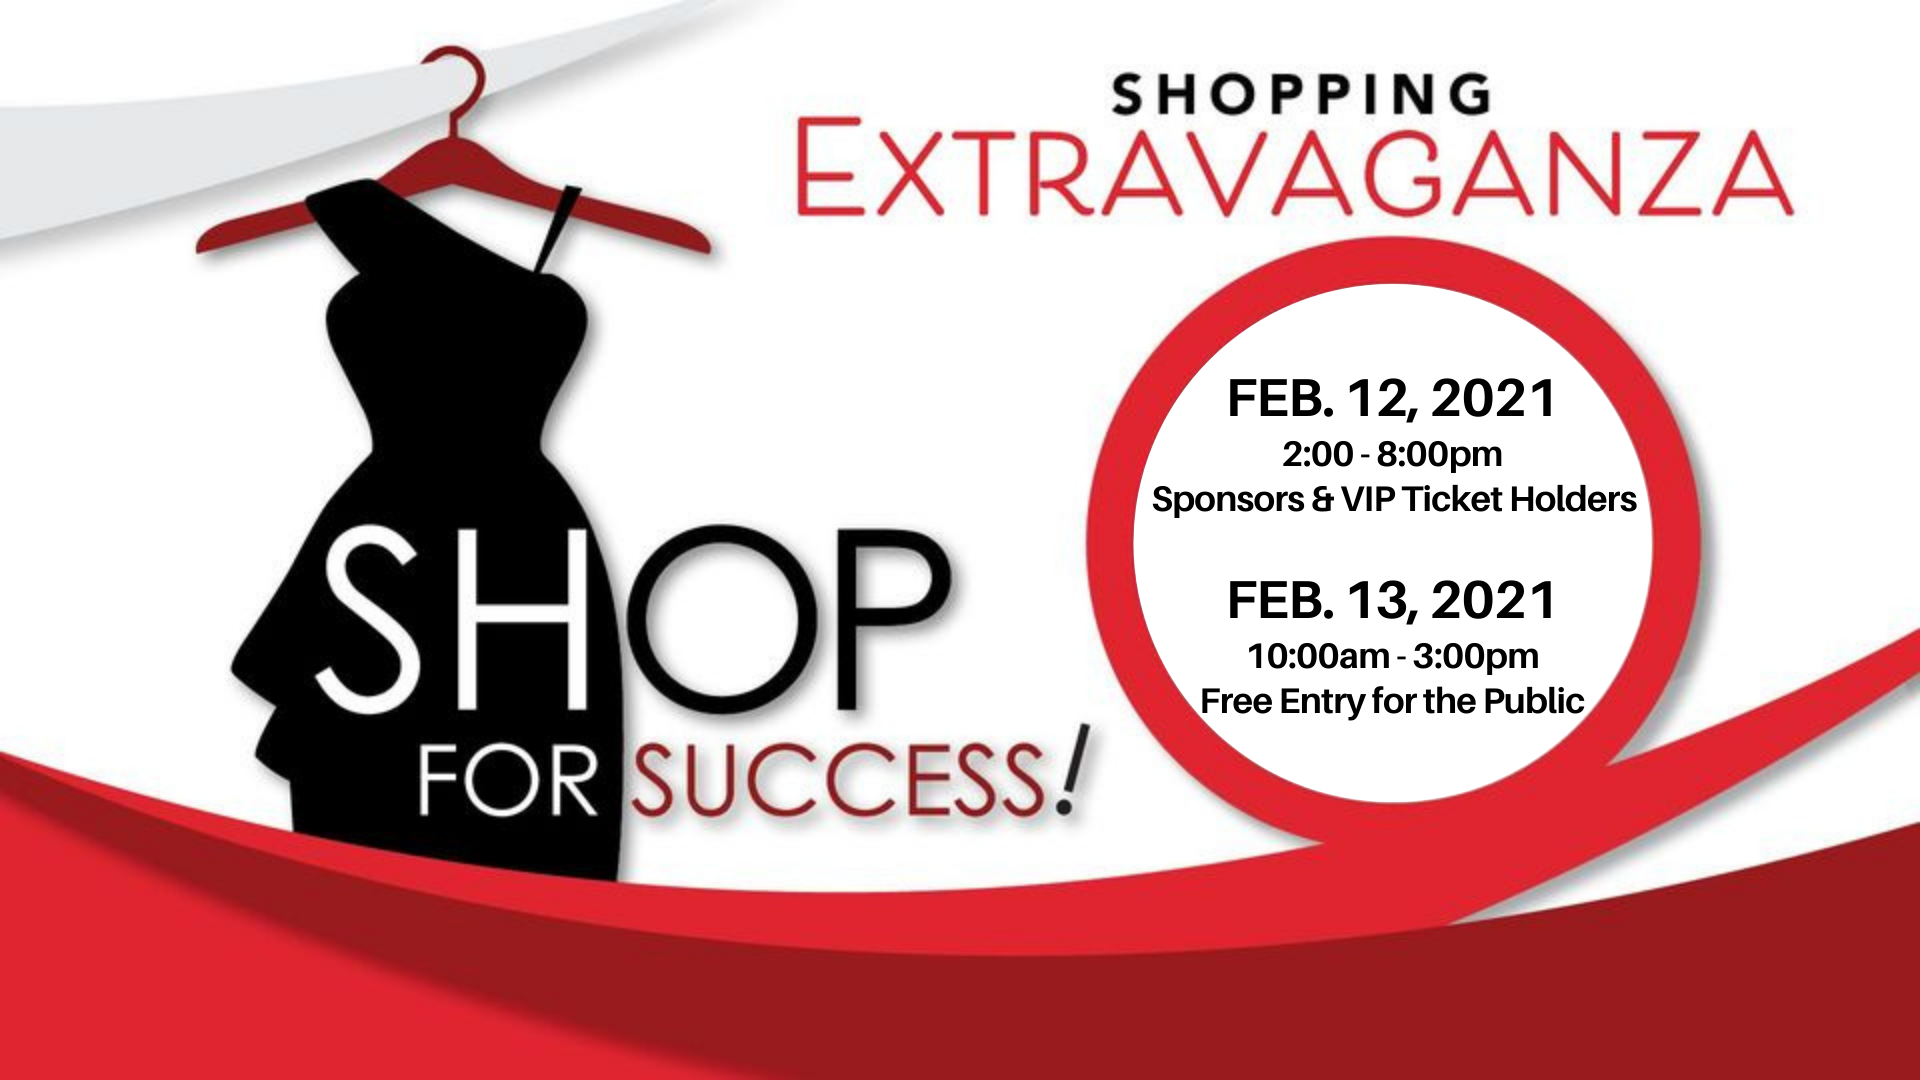 Shopping for Success! Support Dress for Success